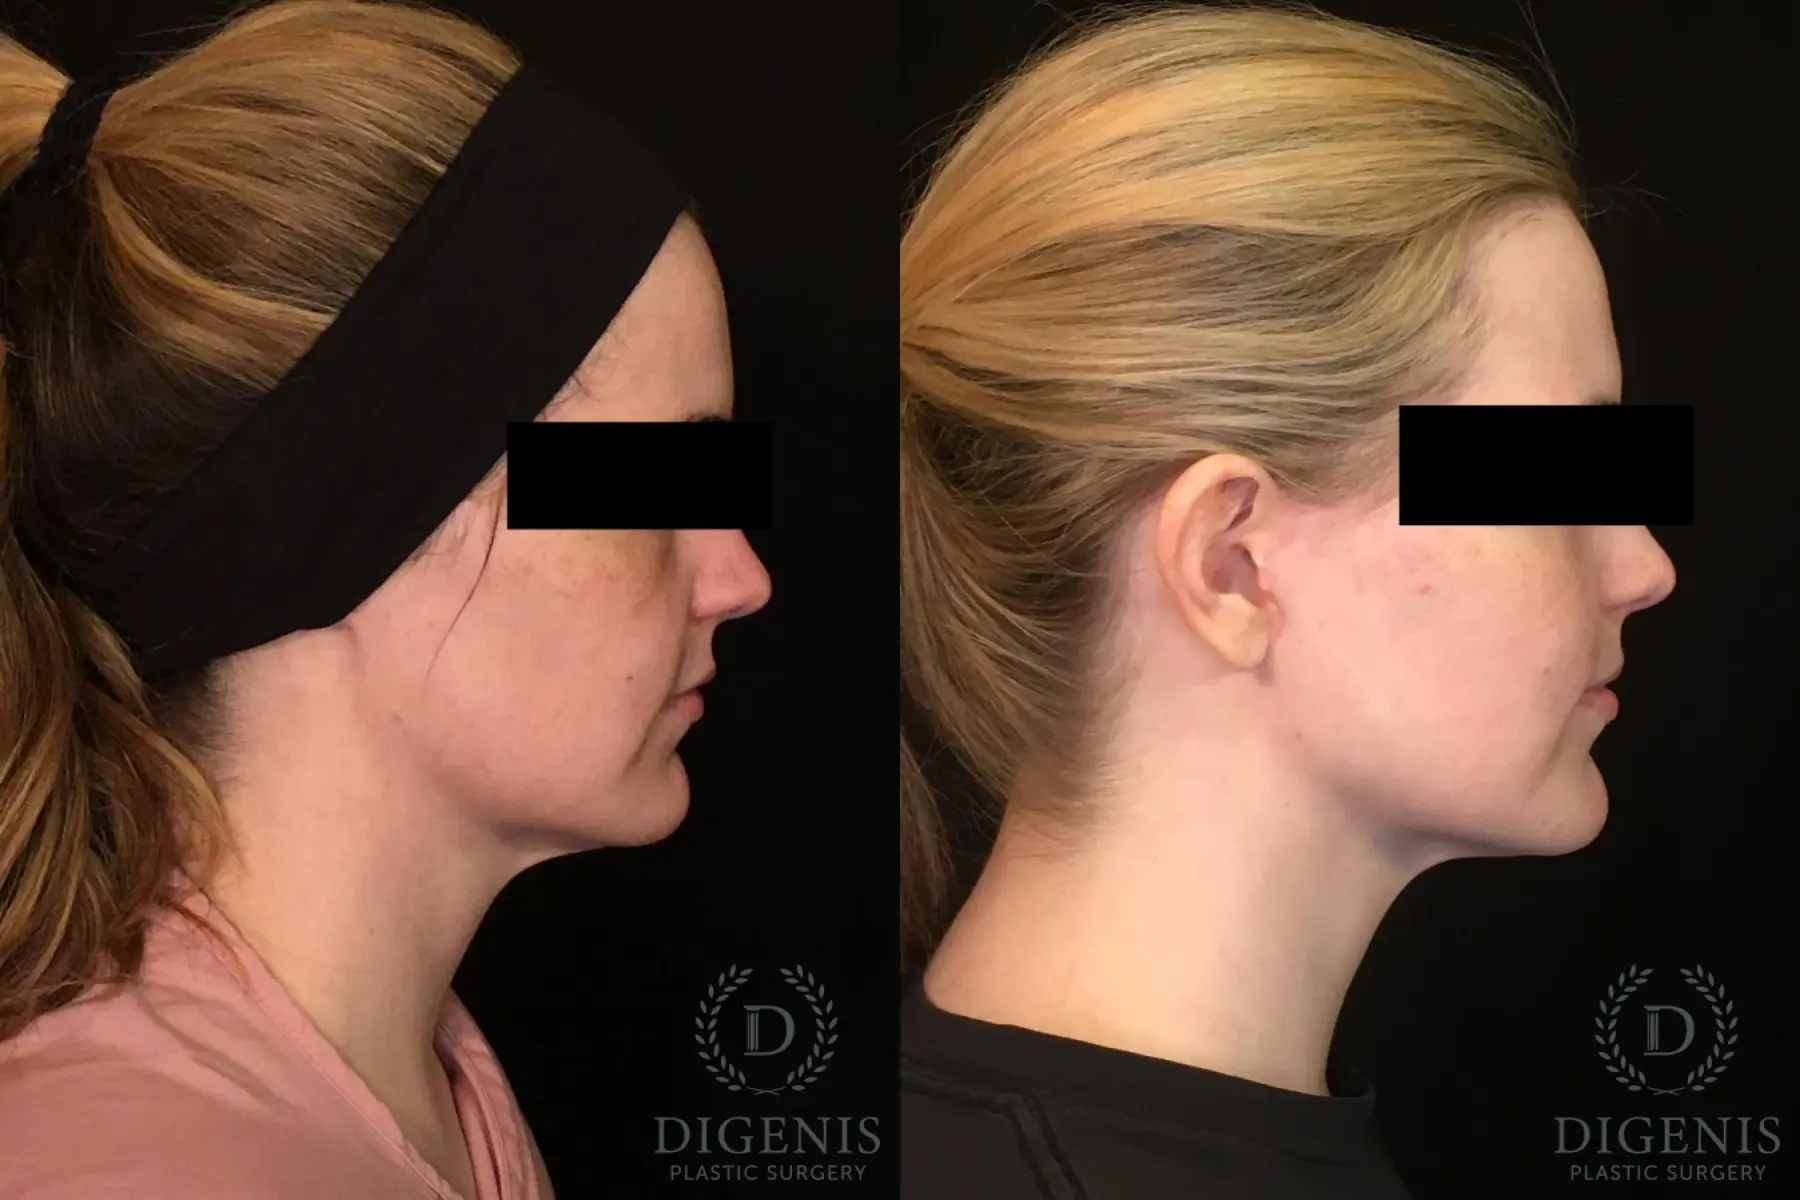 Digenis Refresh Lift: Patient 2 - Before and After 5